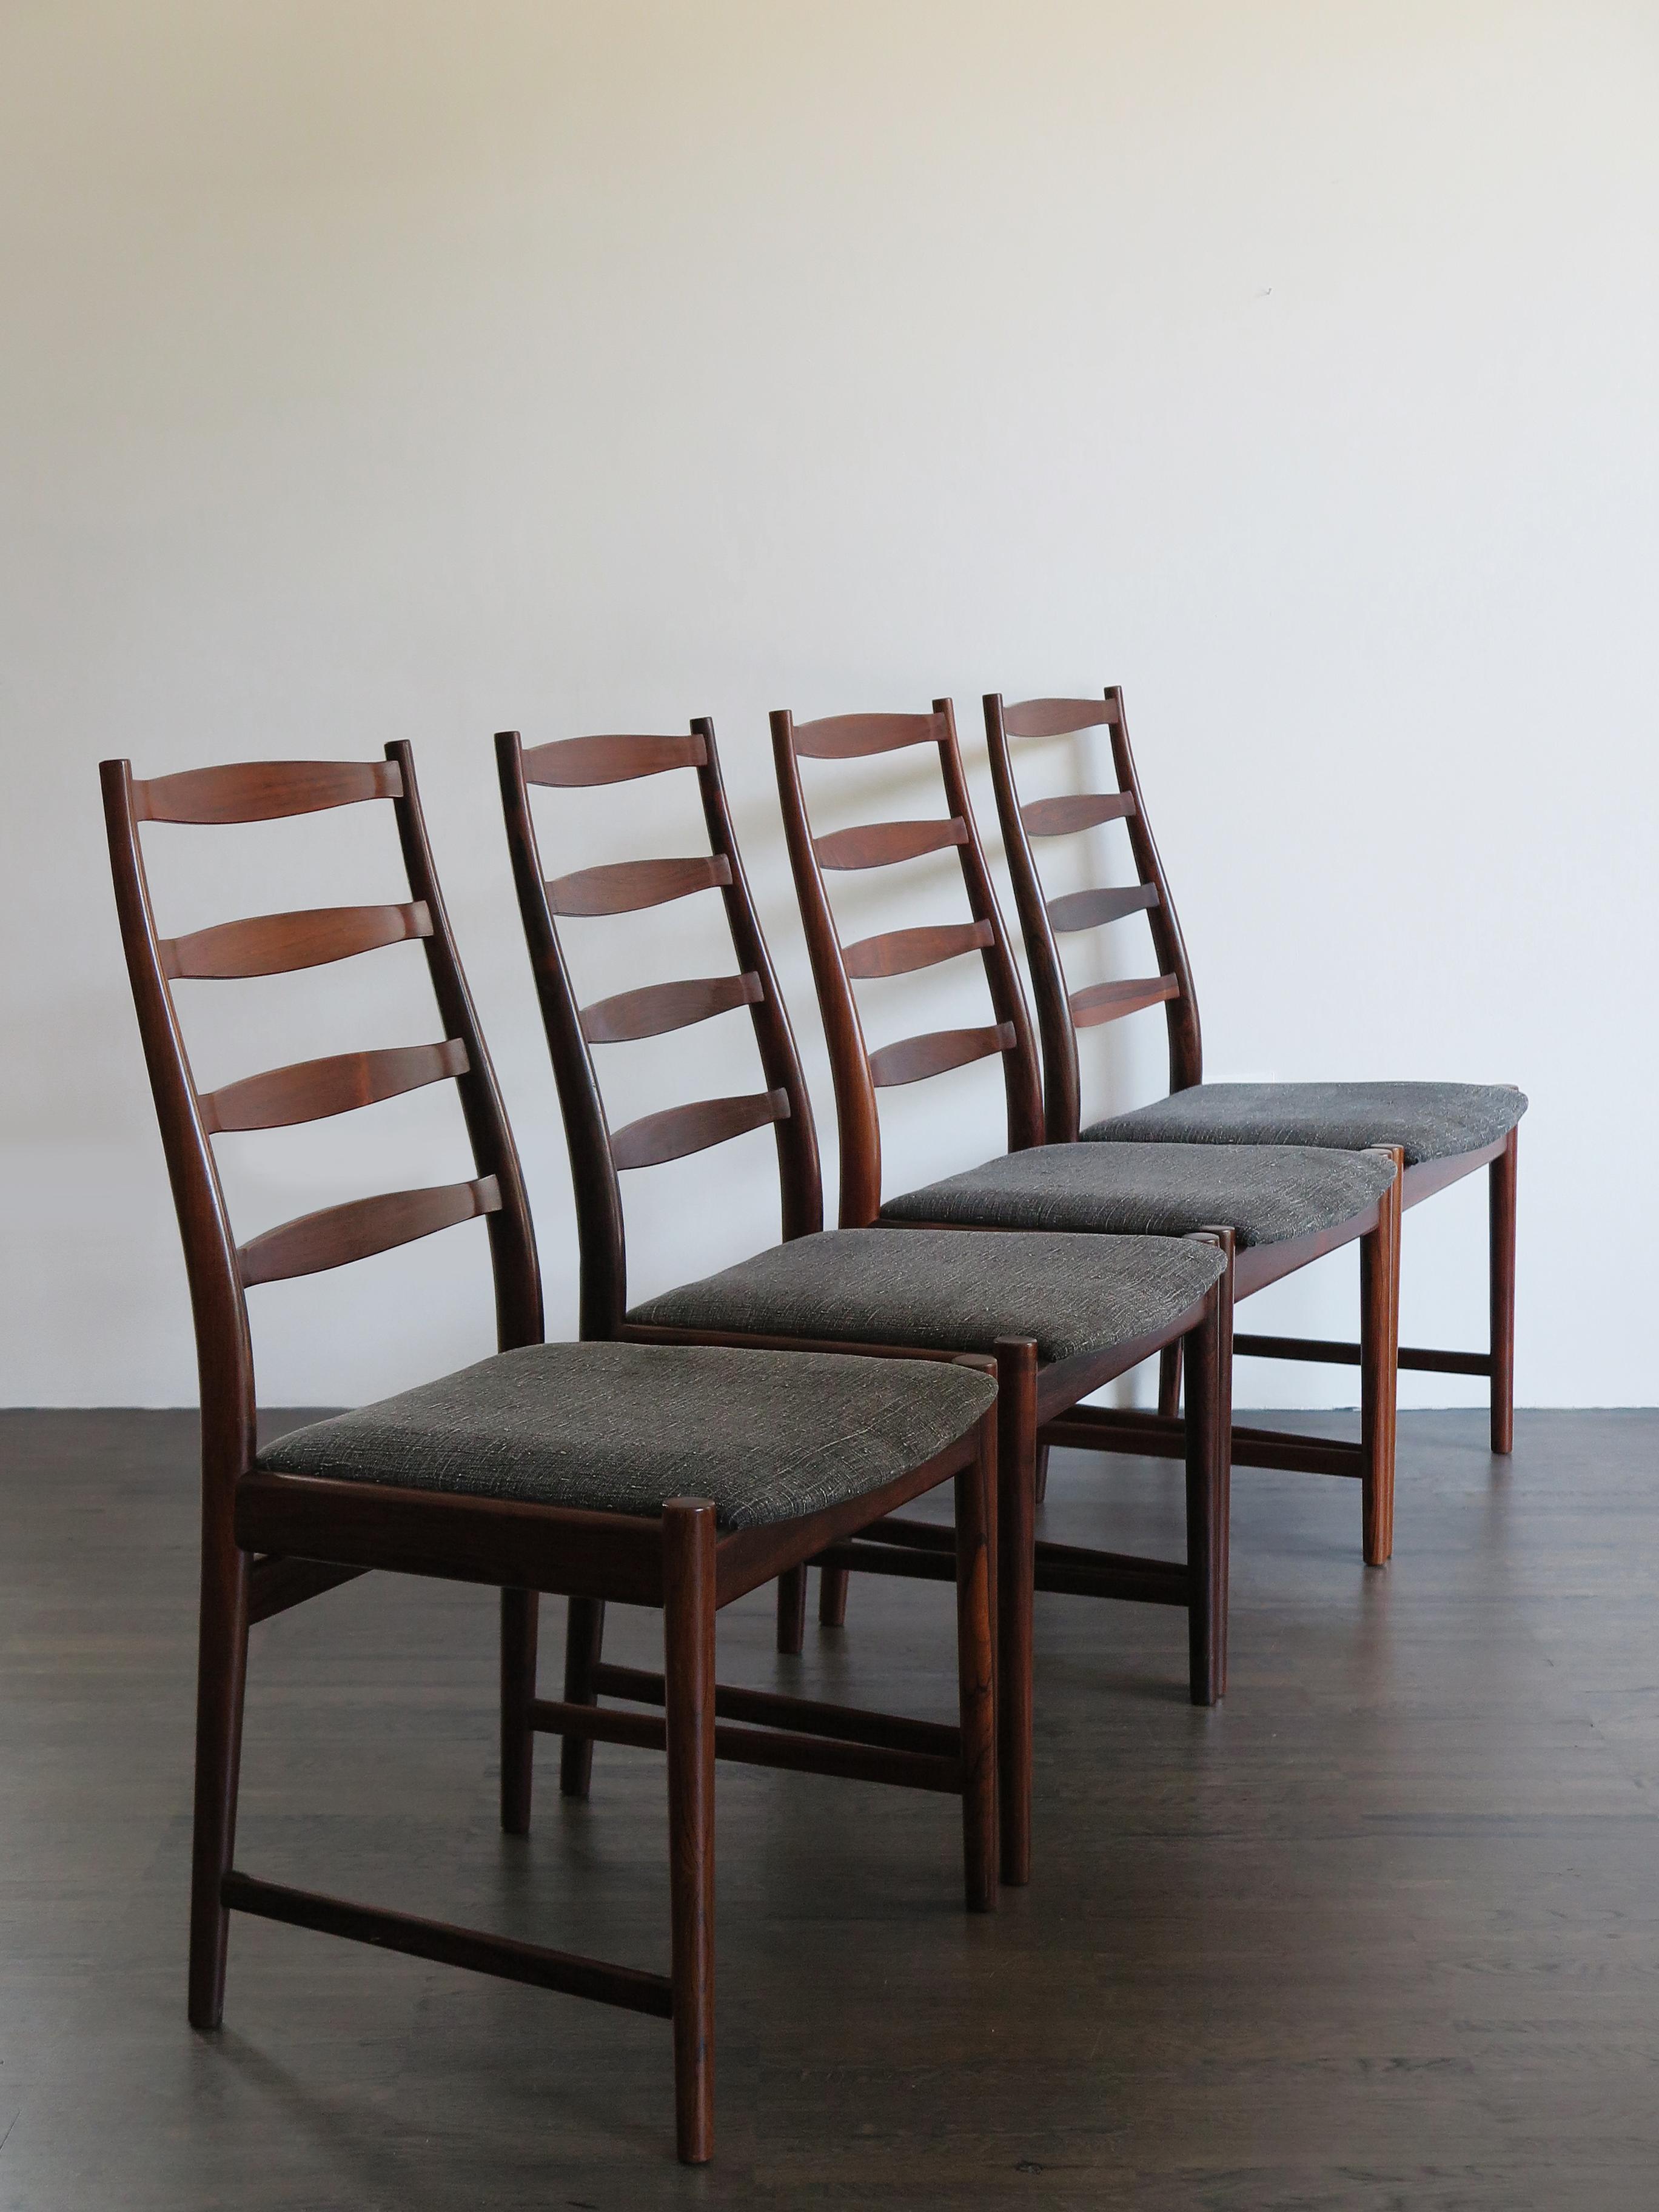 Set of four Scandinavian solid dark wood dining chairs, designed by Arne Vodder, manufacturer’s logo printed on the bottom and new lining fabric, Denmark 1960s

Please note that the chairs are original of the period and this shows normal signs of